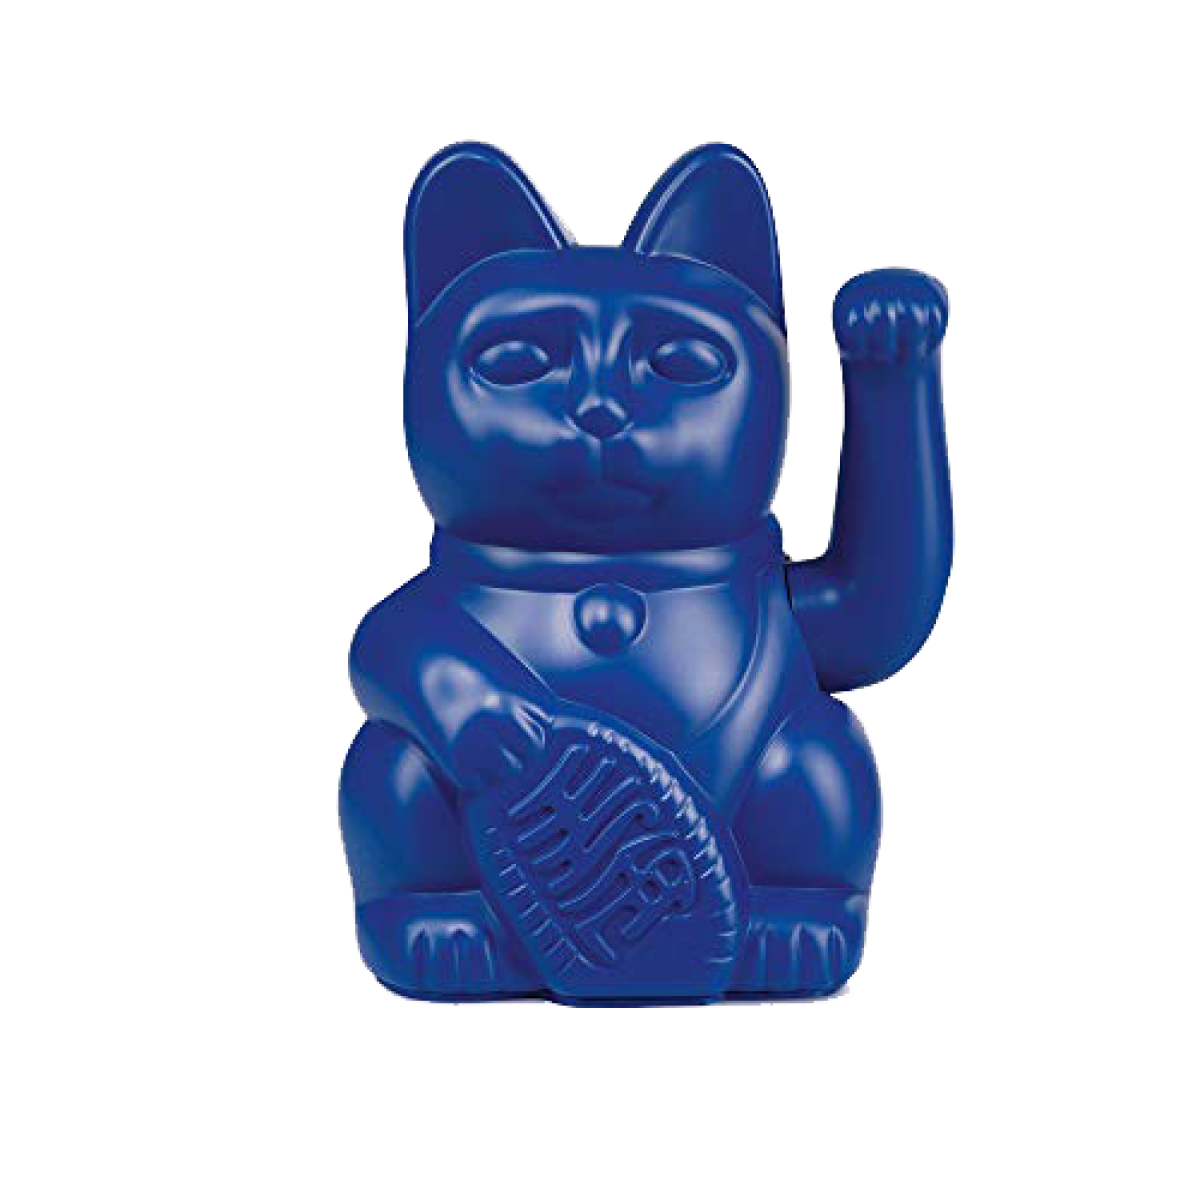 A blue lucky cat with a waving arm